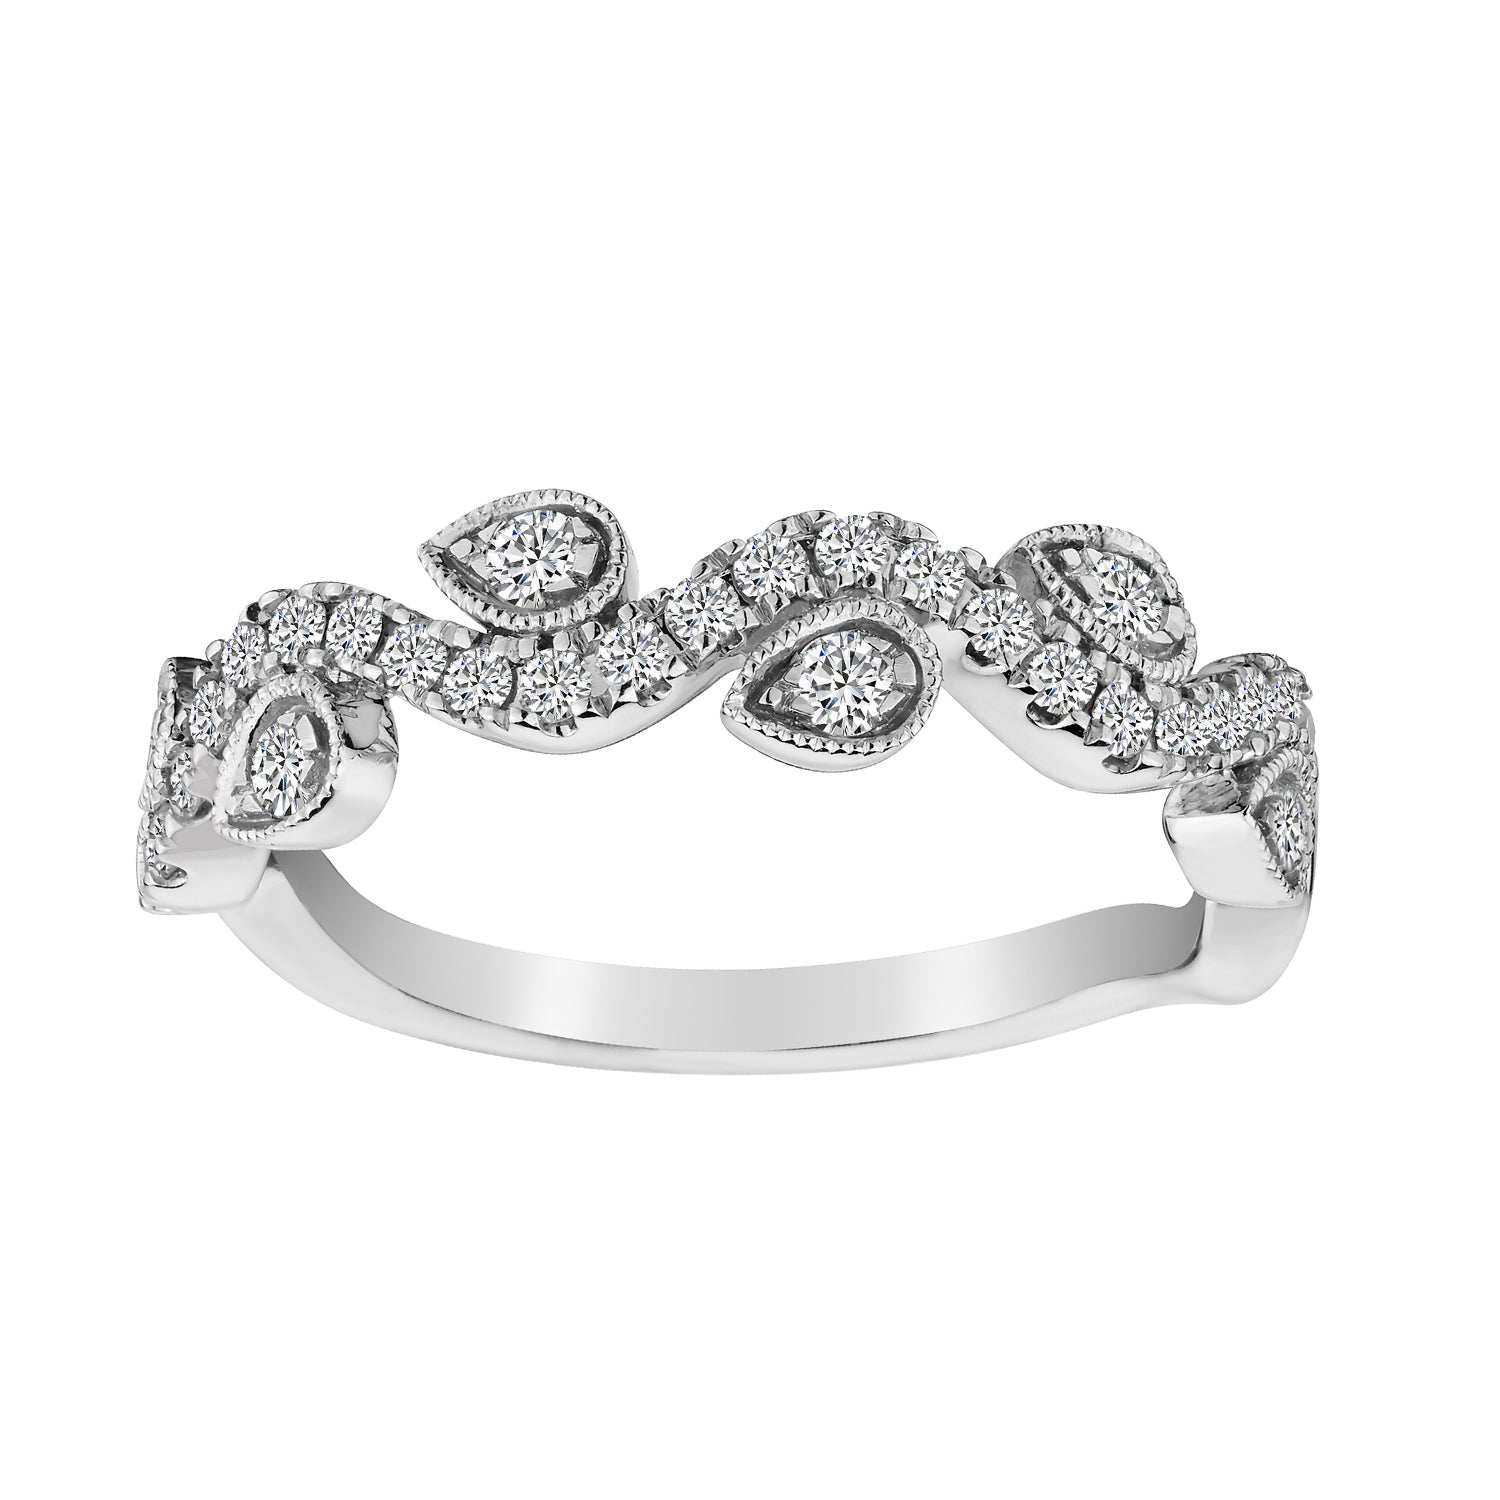 .40 Carat of Diamonds "River" Ring, 10kt White Gold....................NOW